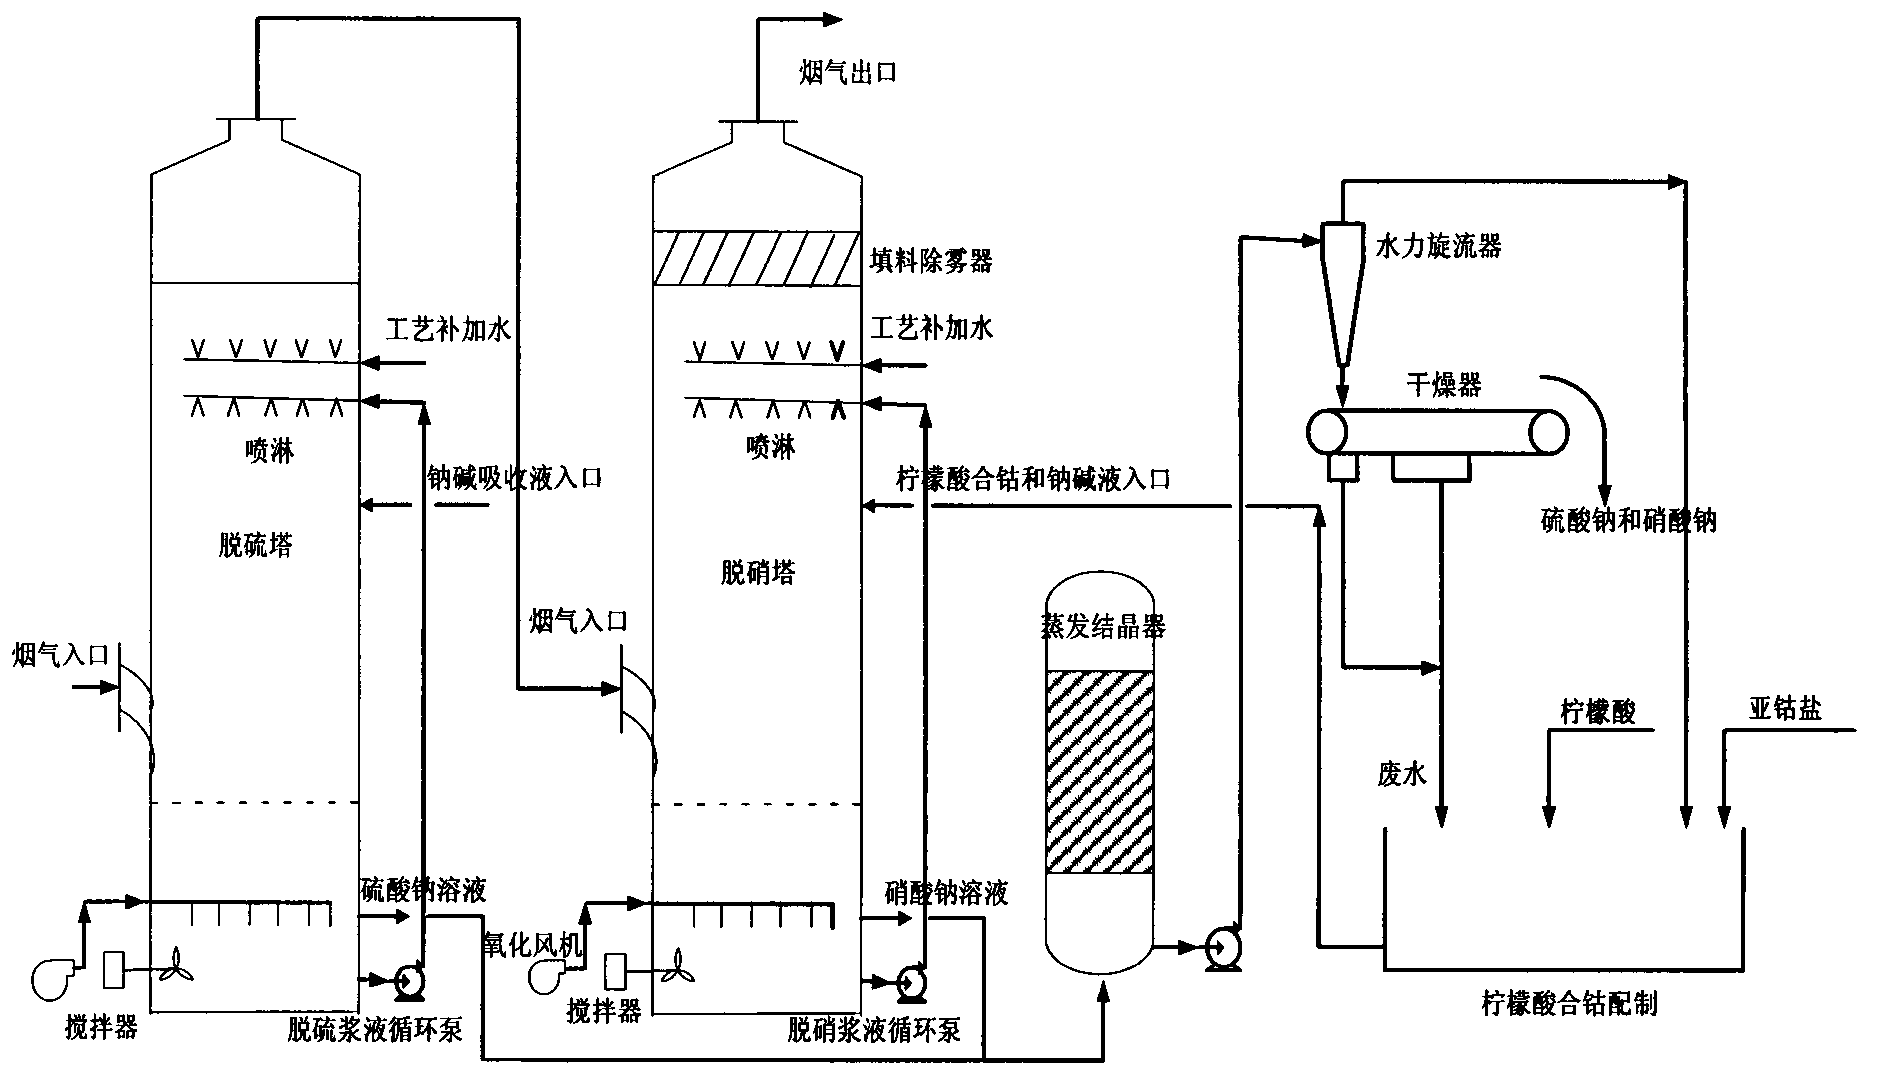 Method for producing sodium sulfate and sodium nitrate by simultaneous desulfurization and denitrification by soda-citric acid cobalt (II)